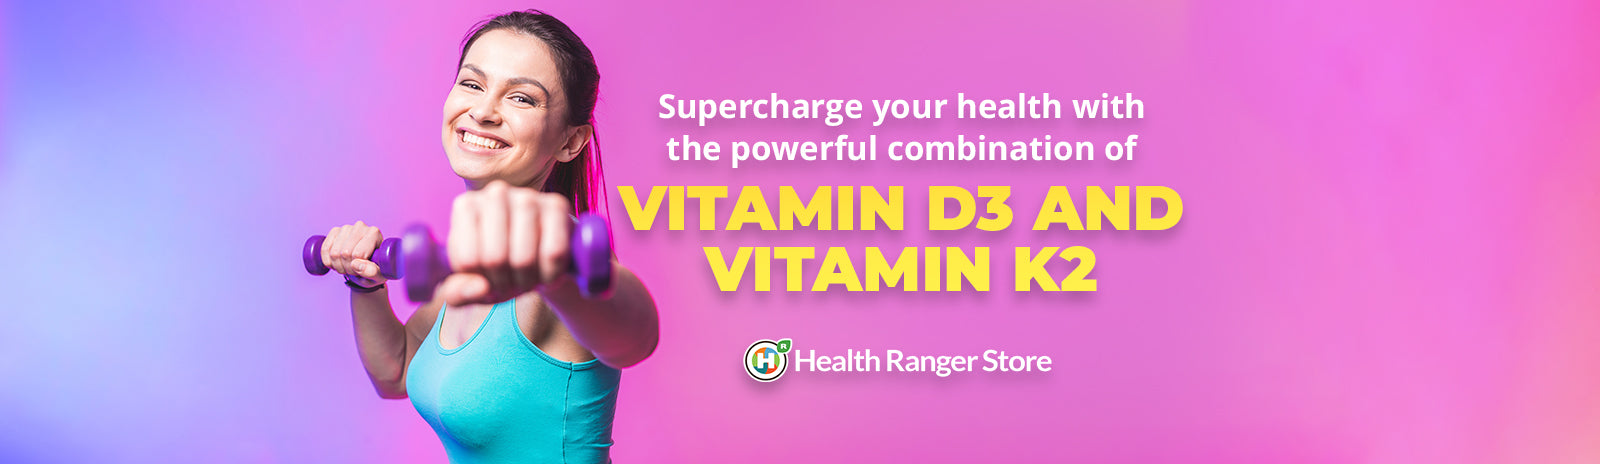 Supercharge your health: Vitamin D3 + Vitamin K2 – Are you getting enough?